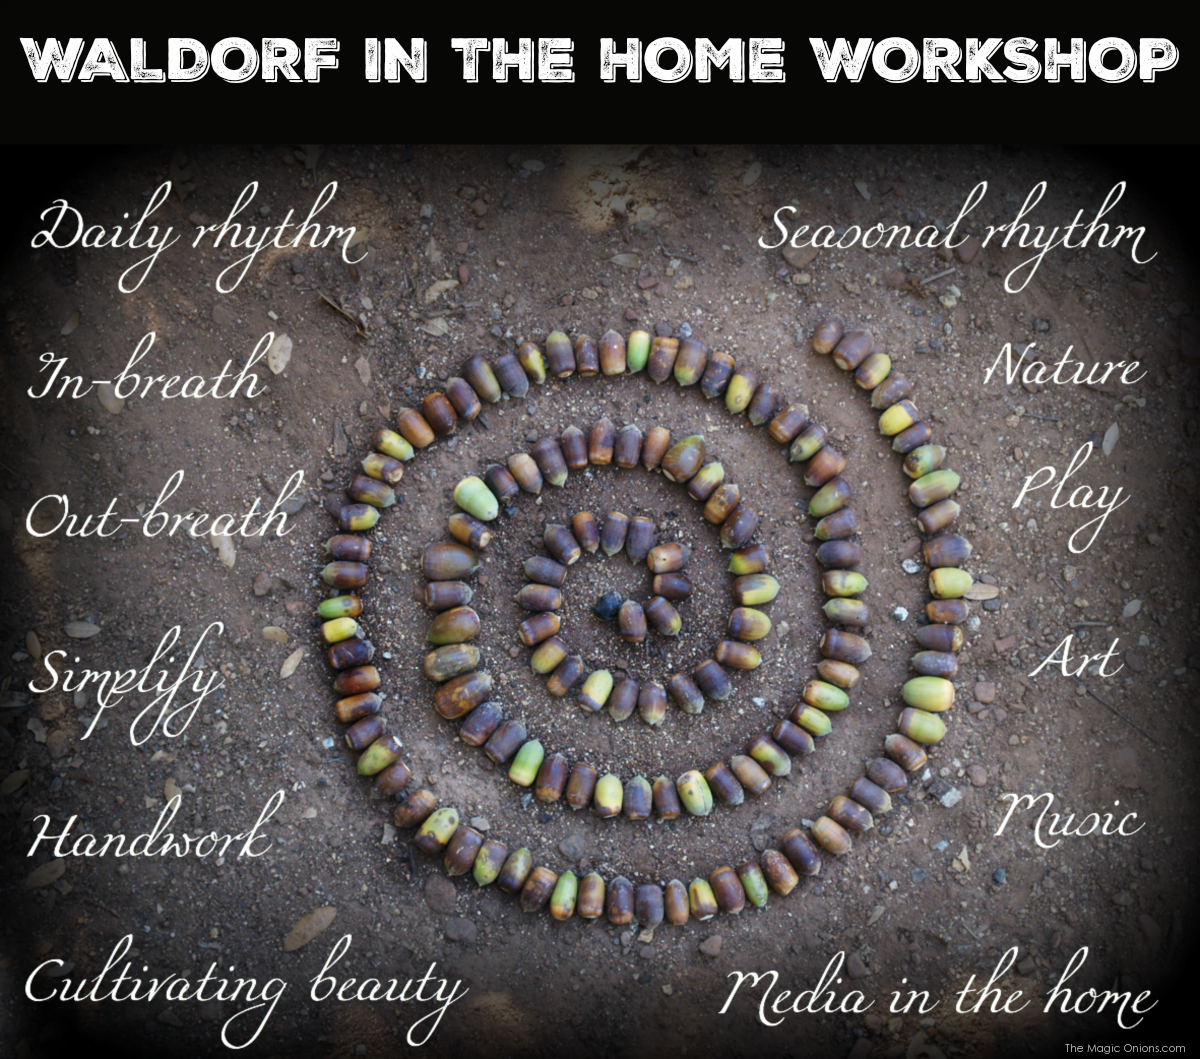 8 Steps to a Waldorf-Inspired Home Workshop. How to bring the beauty of Waldorf philosophies into your home by The Magic Onions